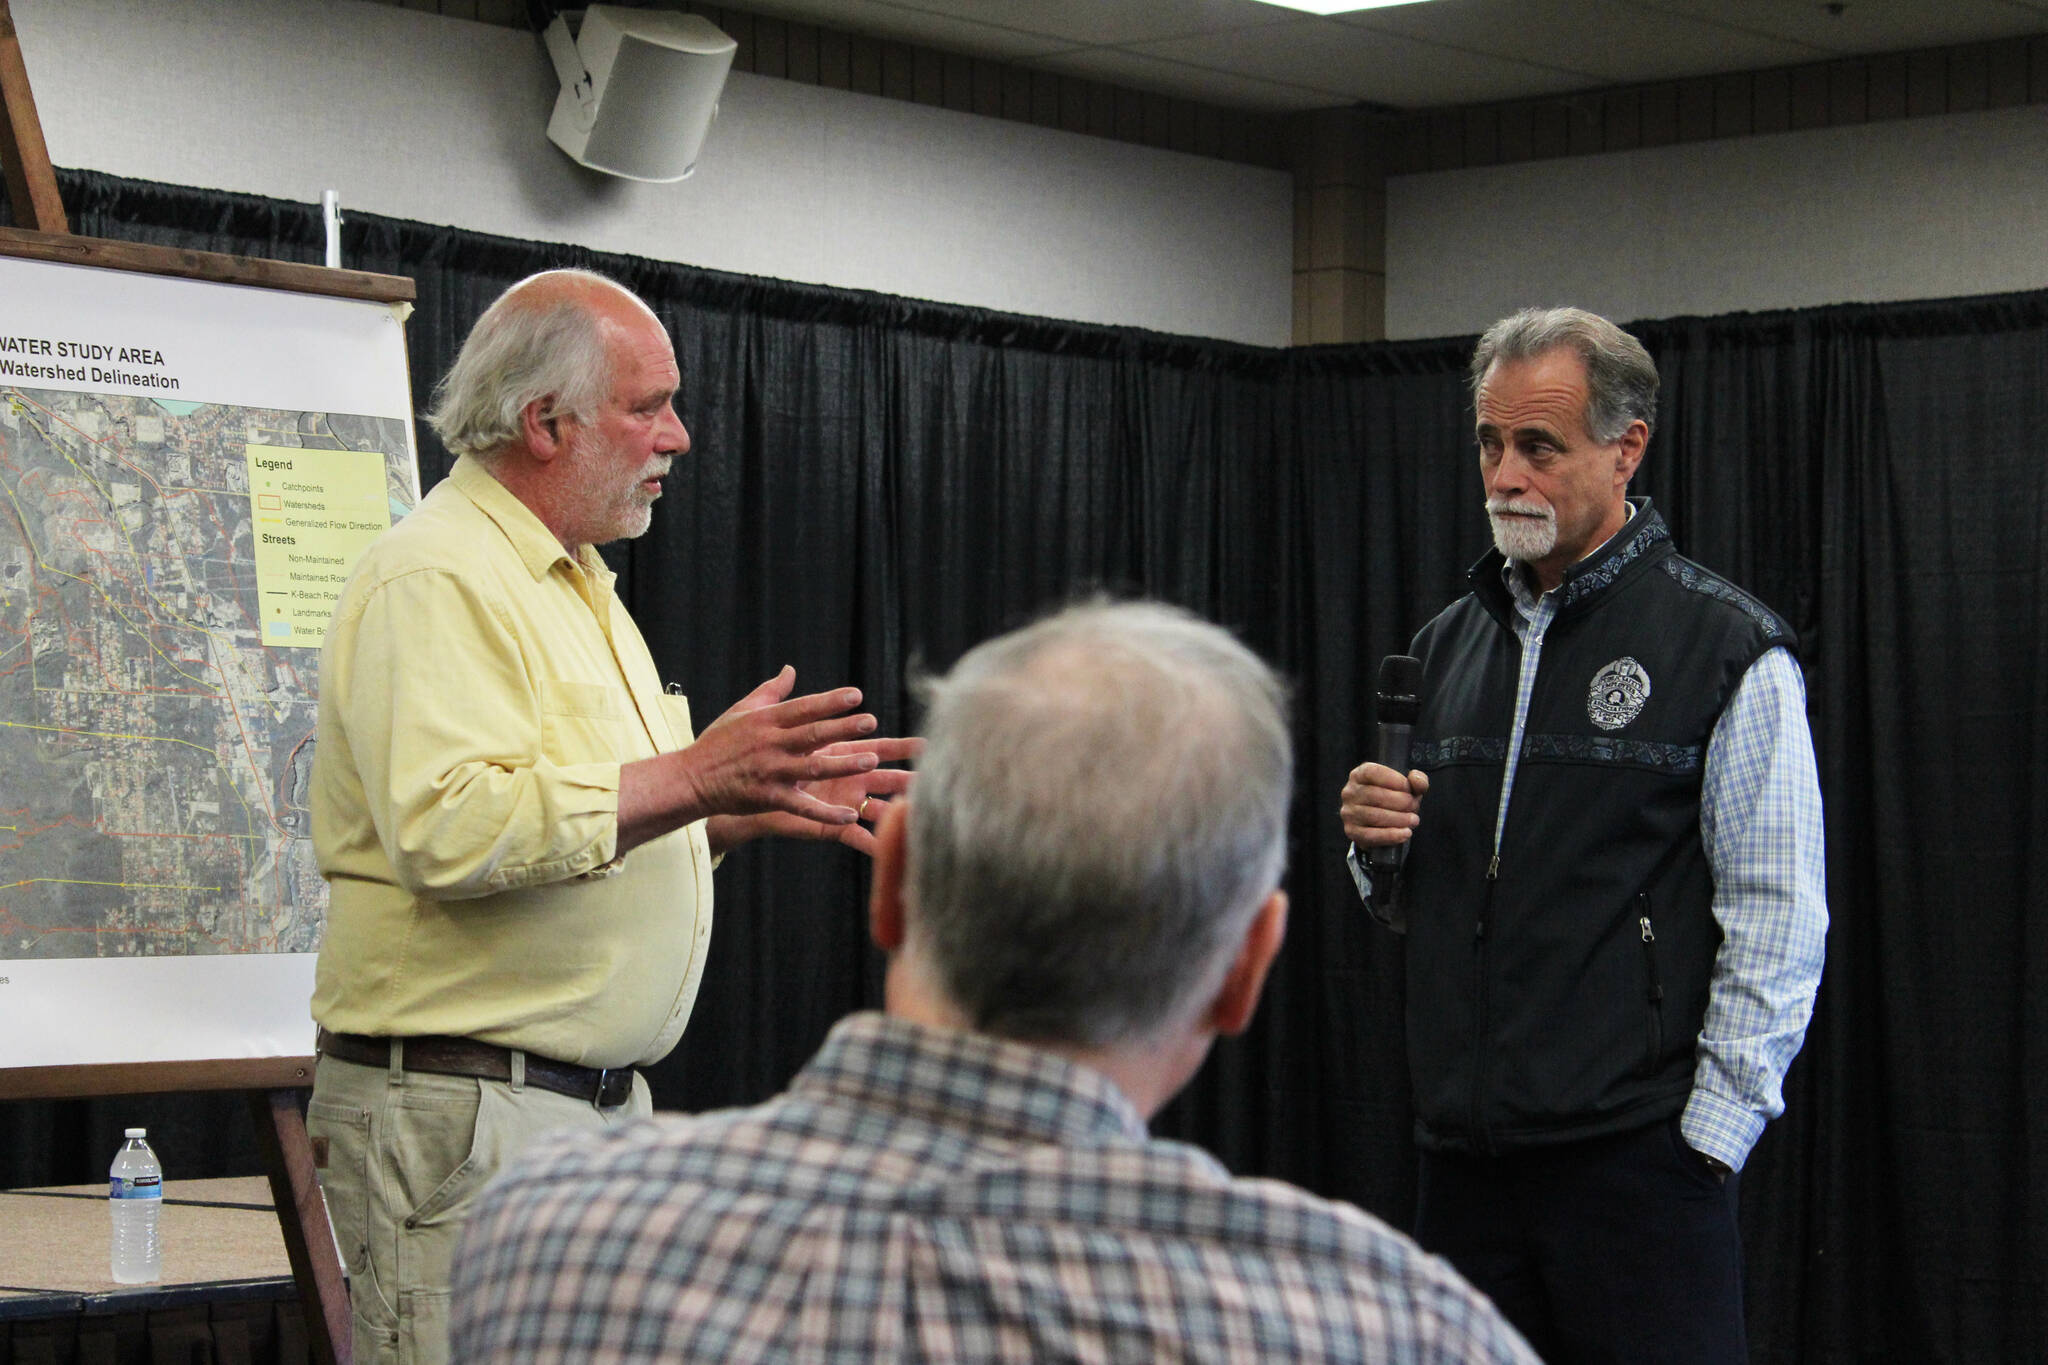 Dave Yragui, left, and Peter Micciche, right, talk about flood problems along Kalifornsky Beach Road during a public meeting on Thursday, Aug. 17, 2023, in Soldotna, Alaska. (Ashlyn O’Hara/Peninsula Clarion)